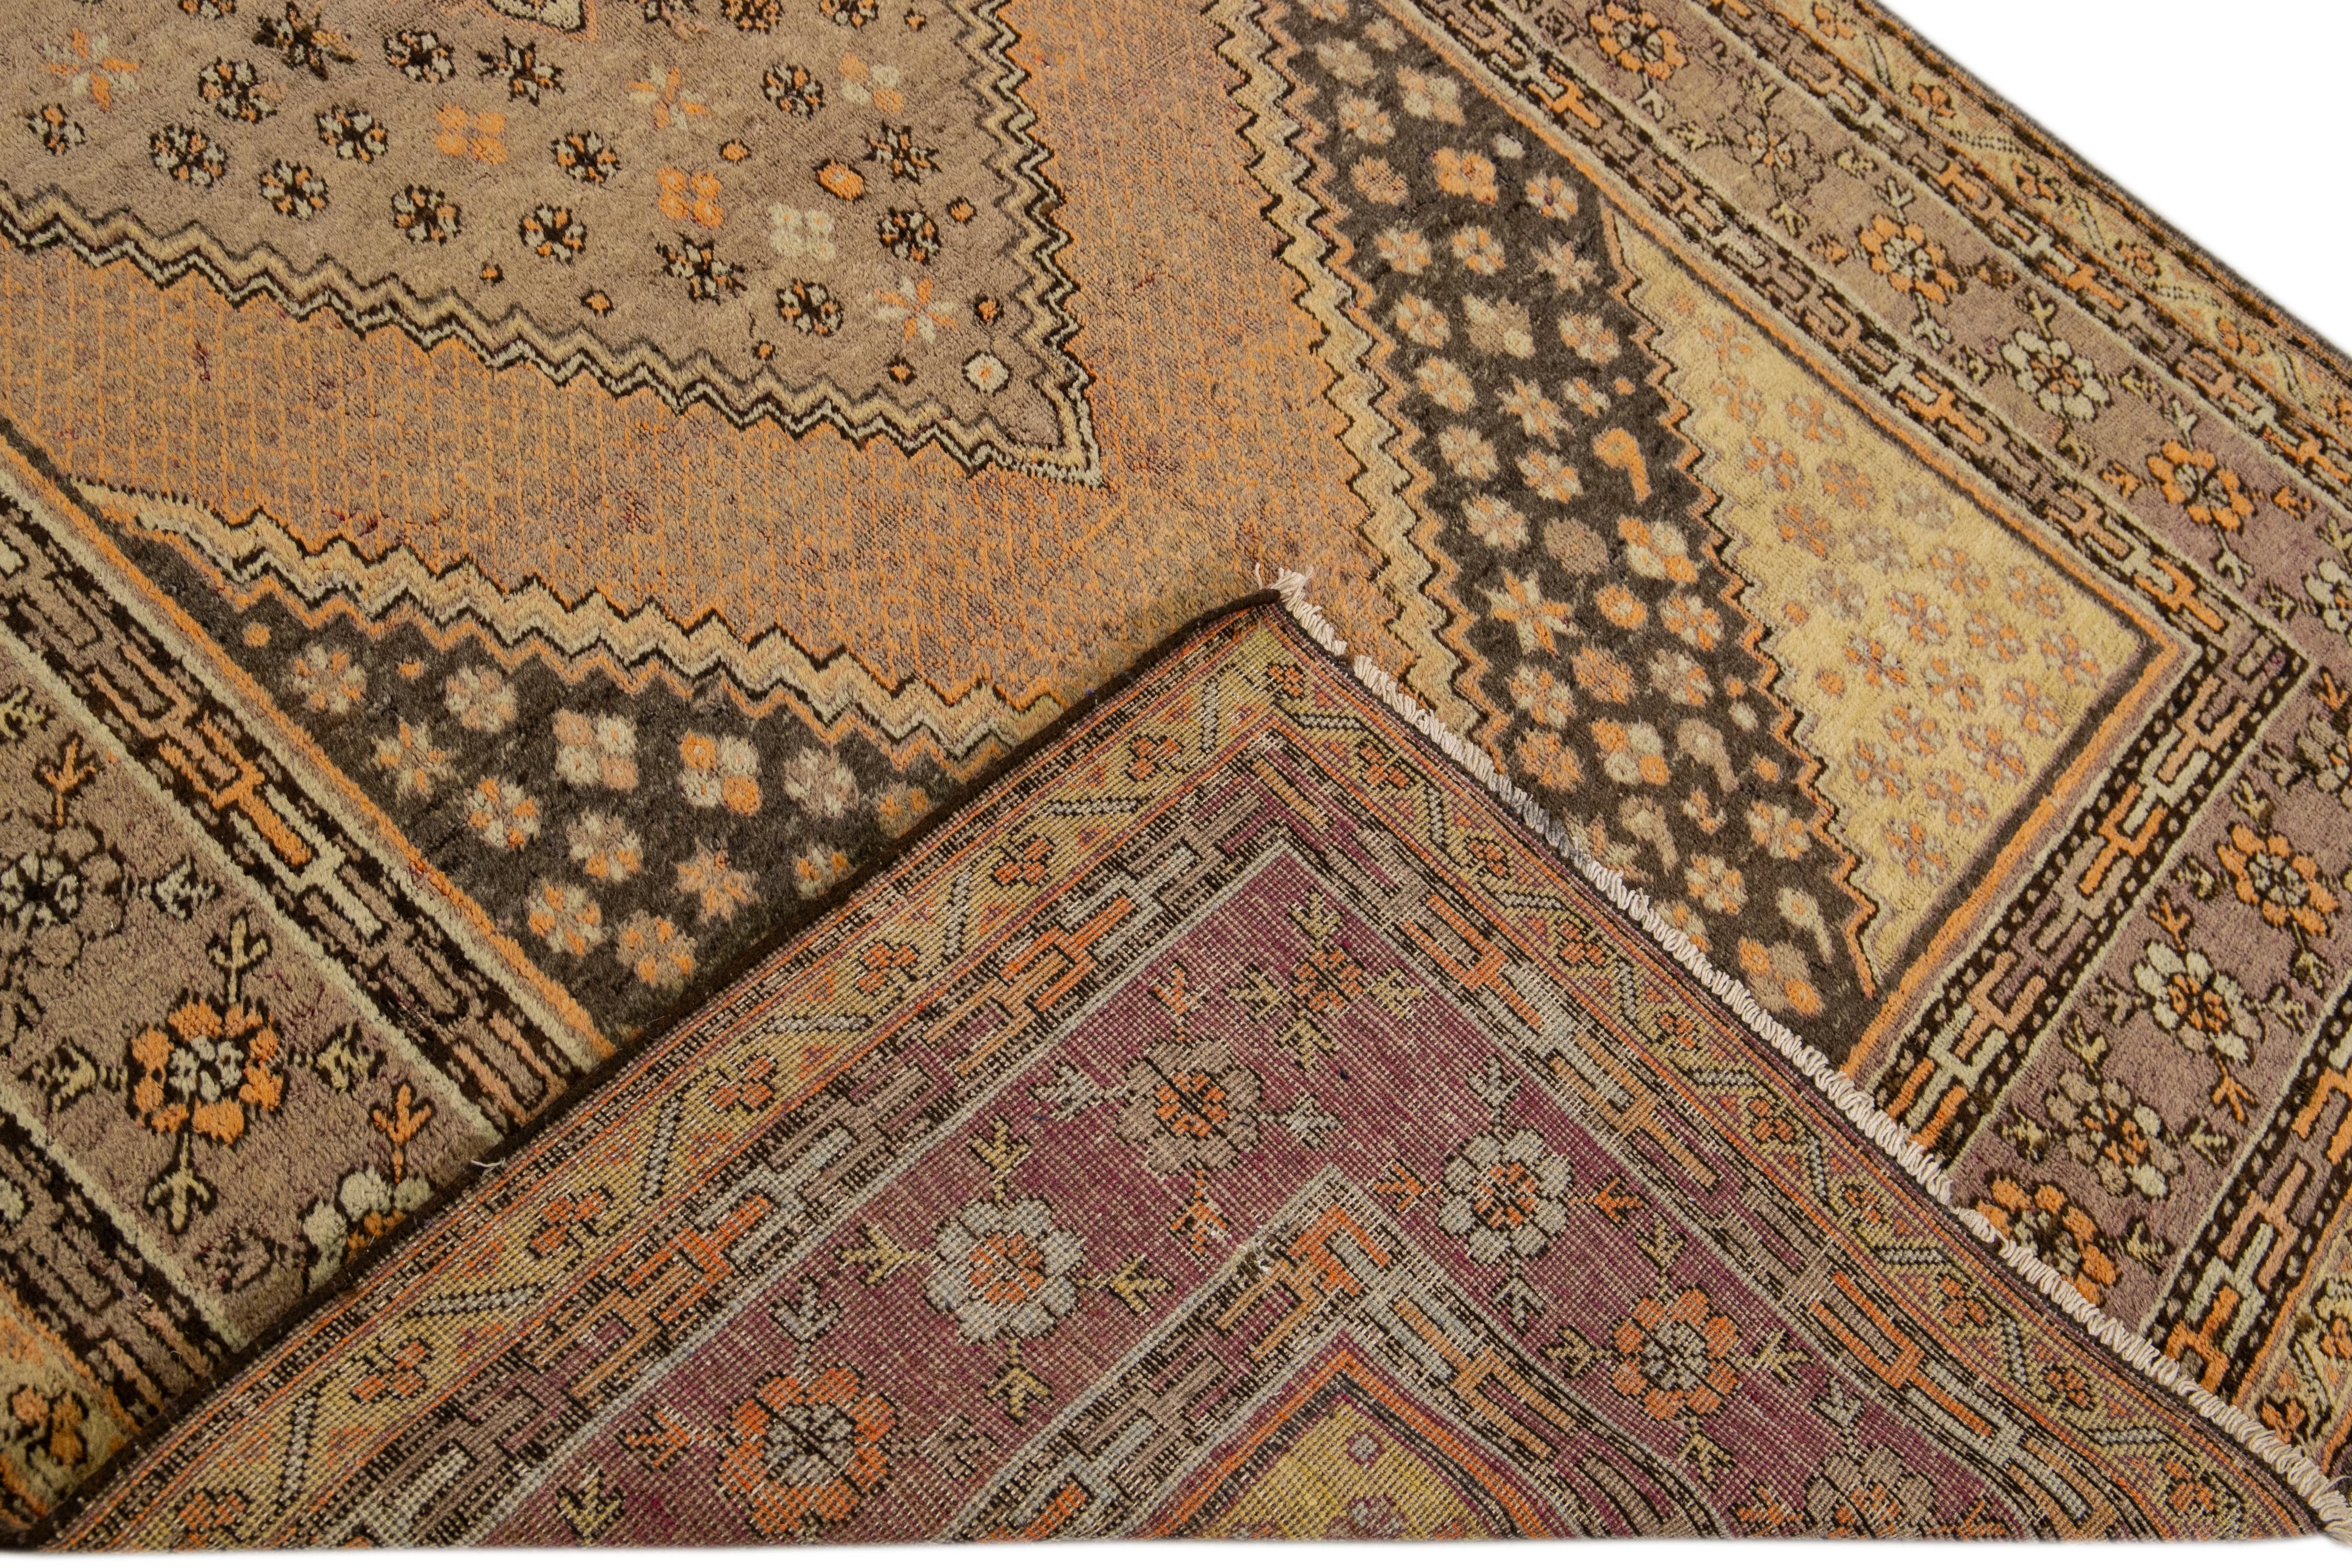 Beautiful antique Khotan hand-knotted wool rug with a tan field. This Khotan rug has a brown and orange accent in an all-over medallion floral design. 

This rug measures 5'7